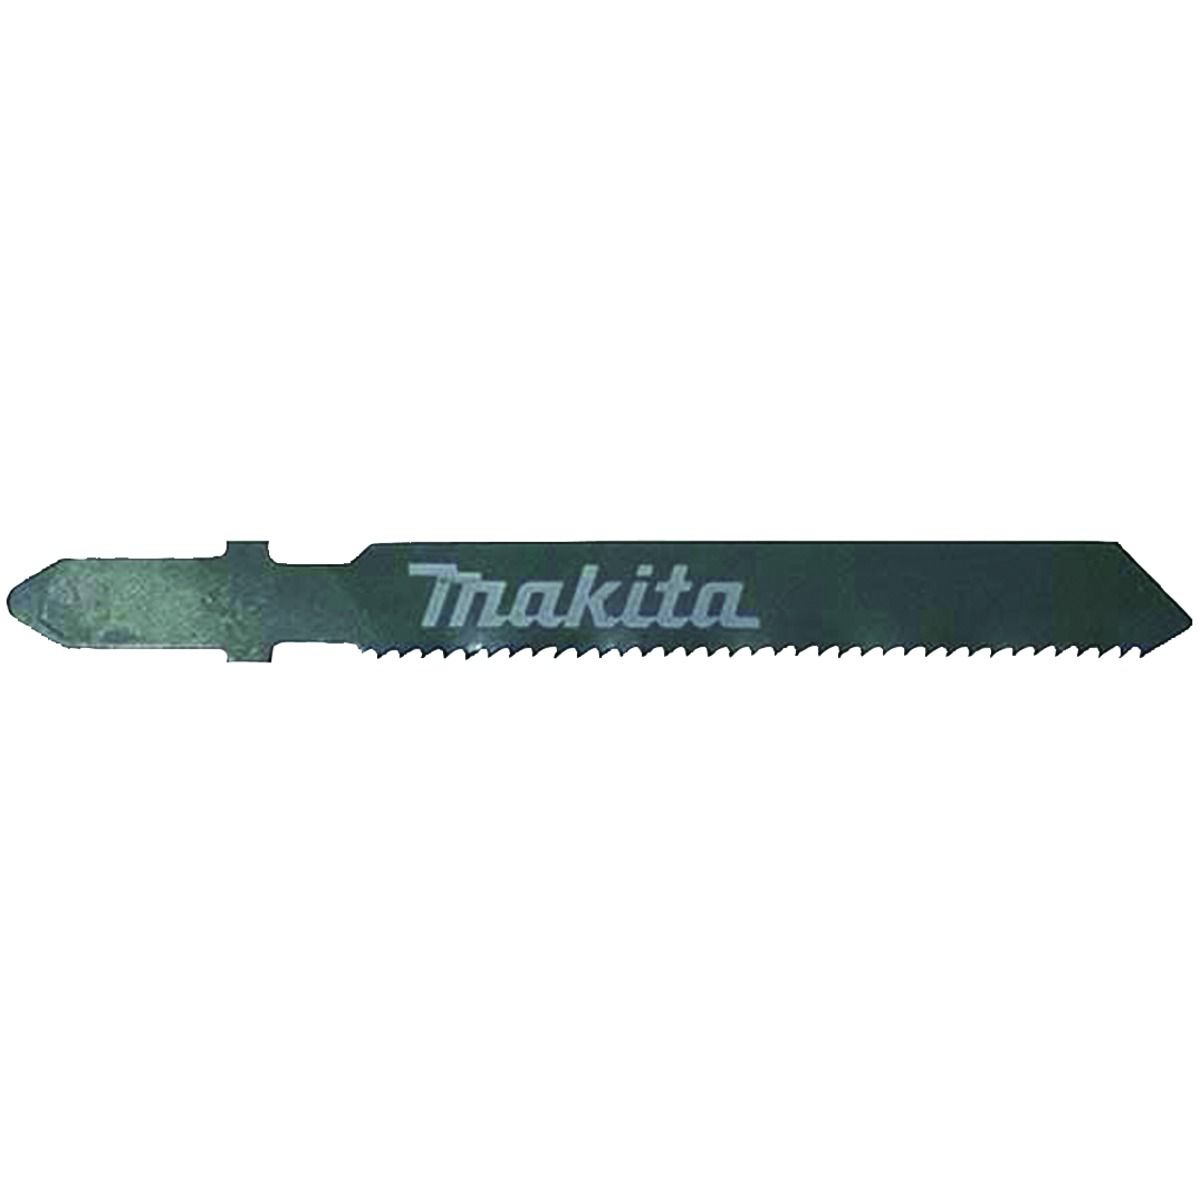 Image of Makita B-10453 Jigsaw Blades For Tough Plastic - Pack of 5